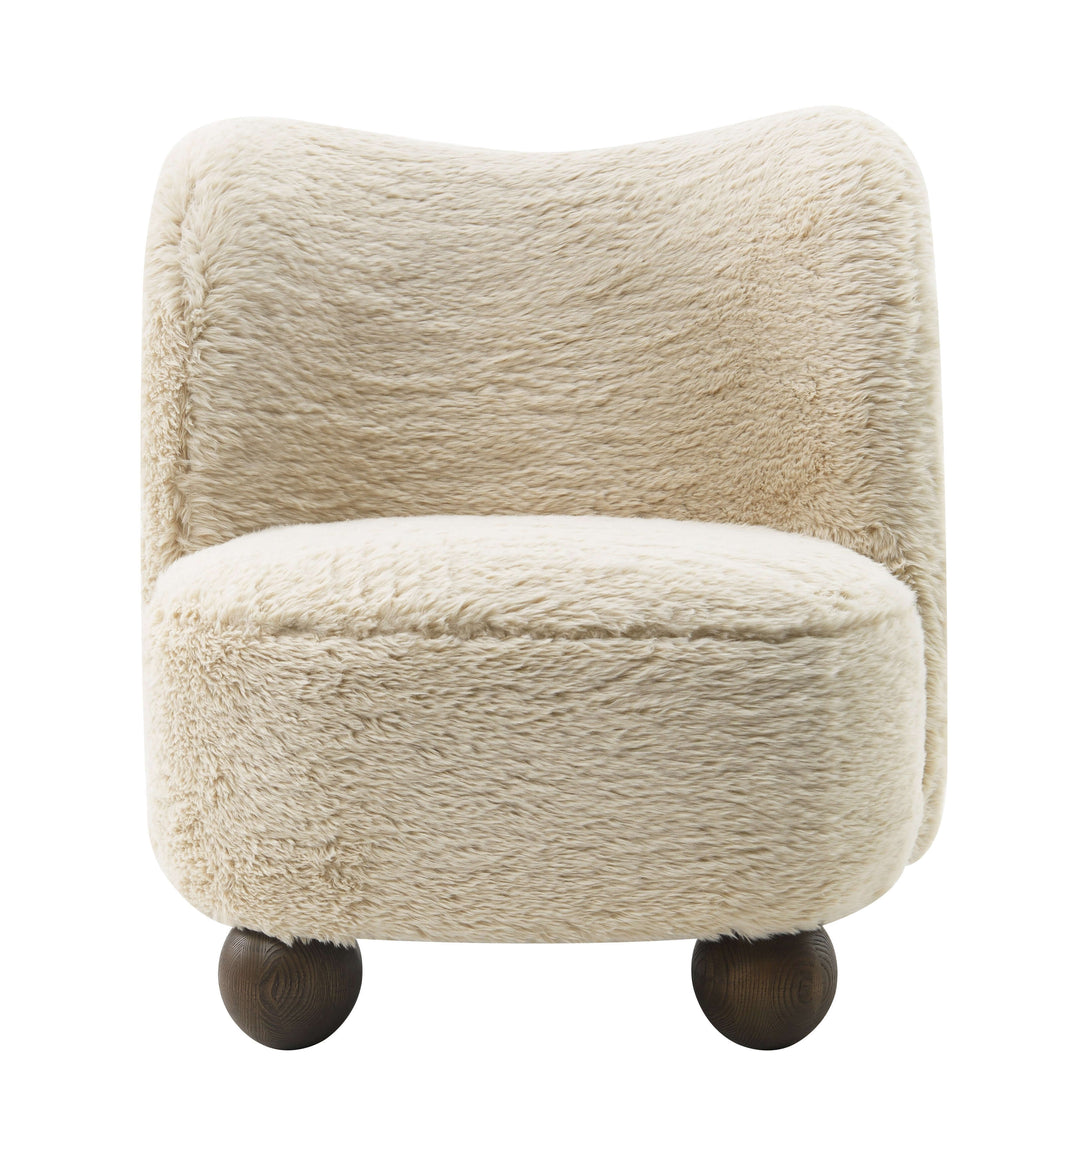 Ball-foot Accent Chair, Ivory